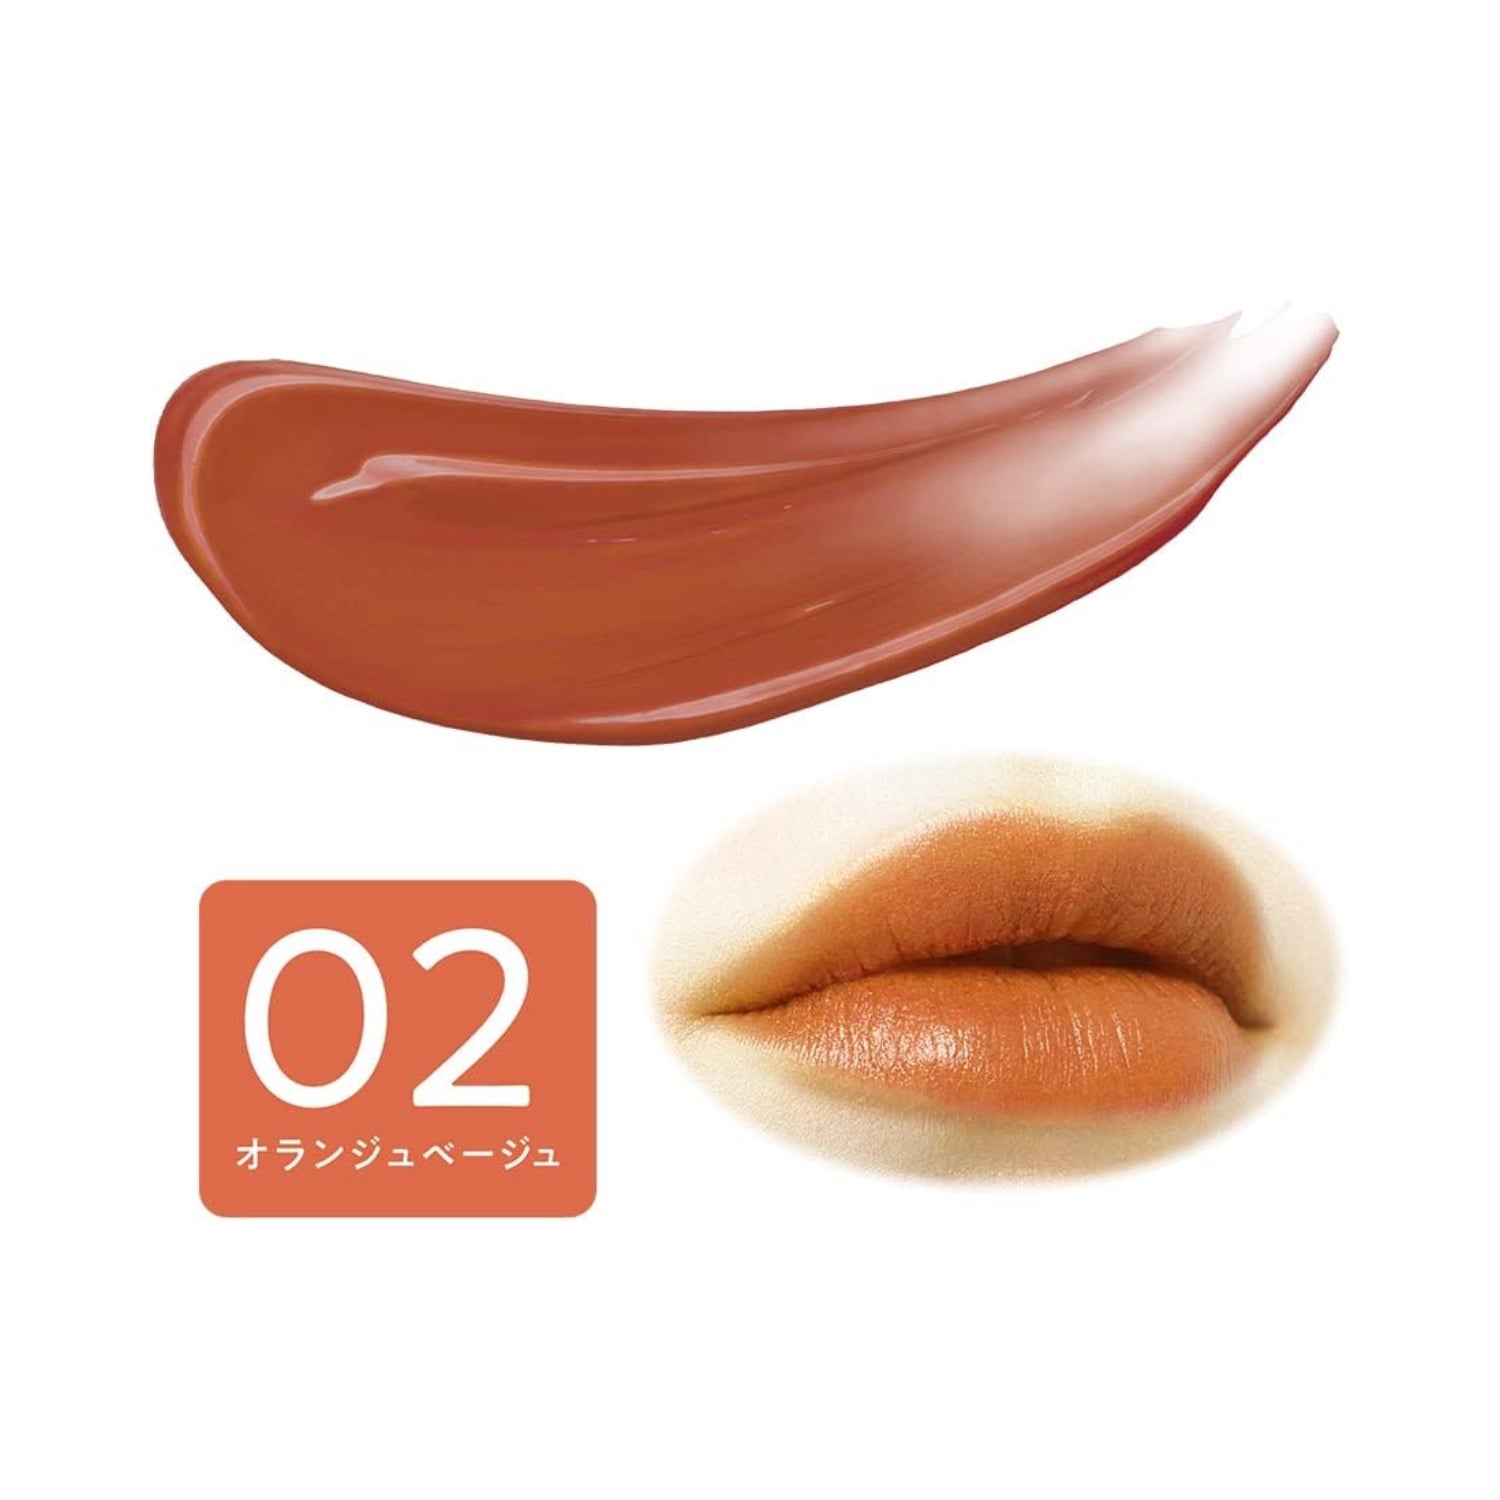 Cezanne Color and Glossy Lip Stick 3.7g (Various Shades) - Buy Me Japan